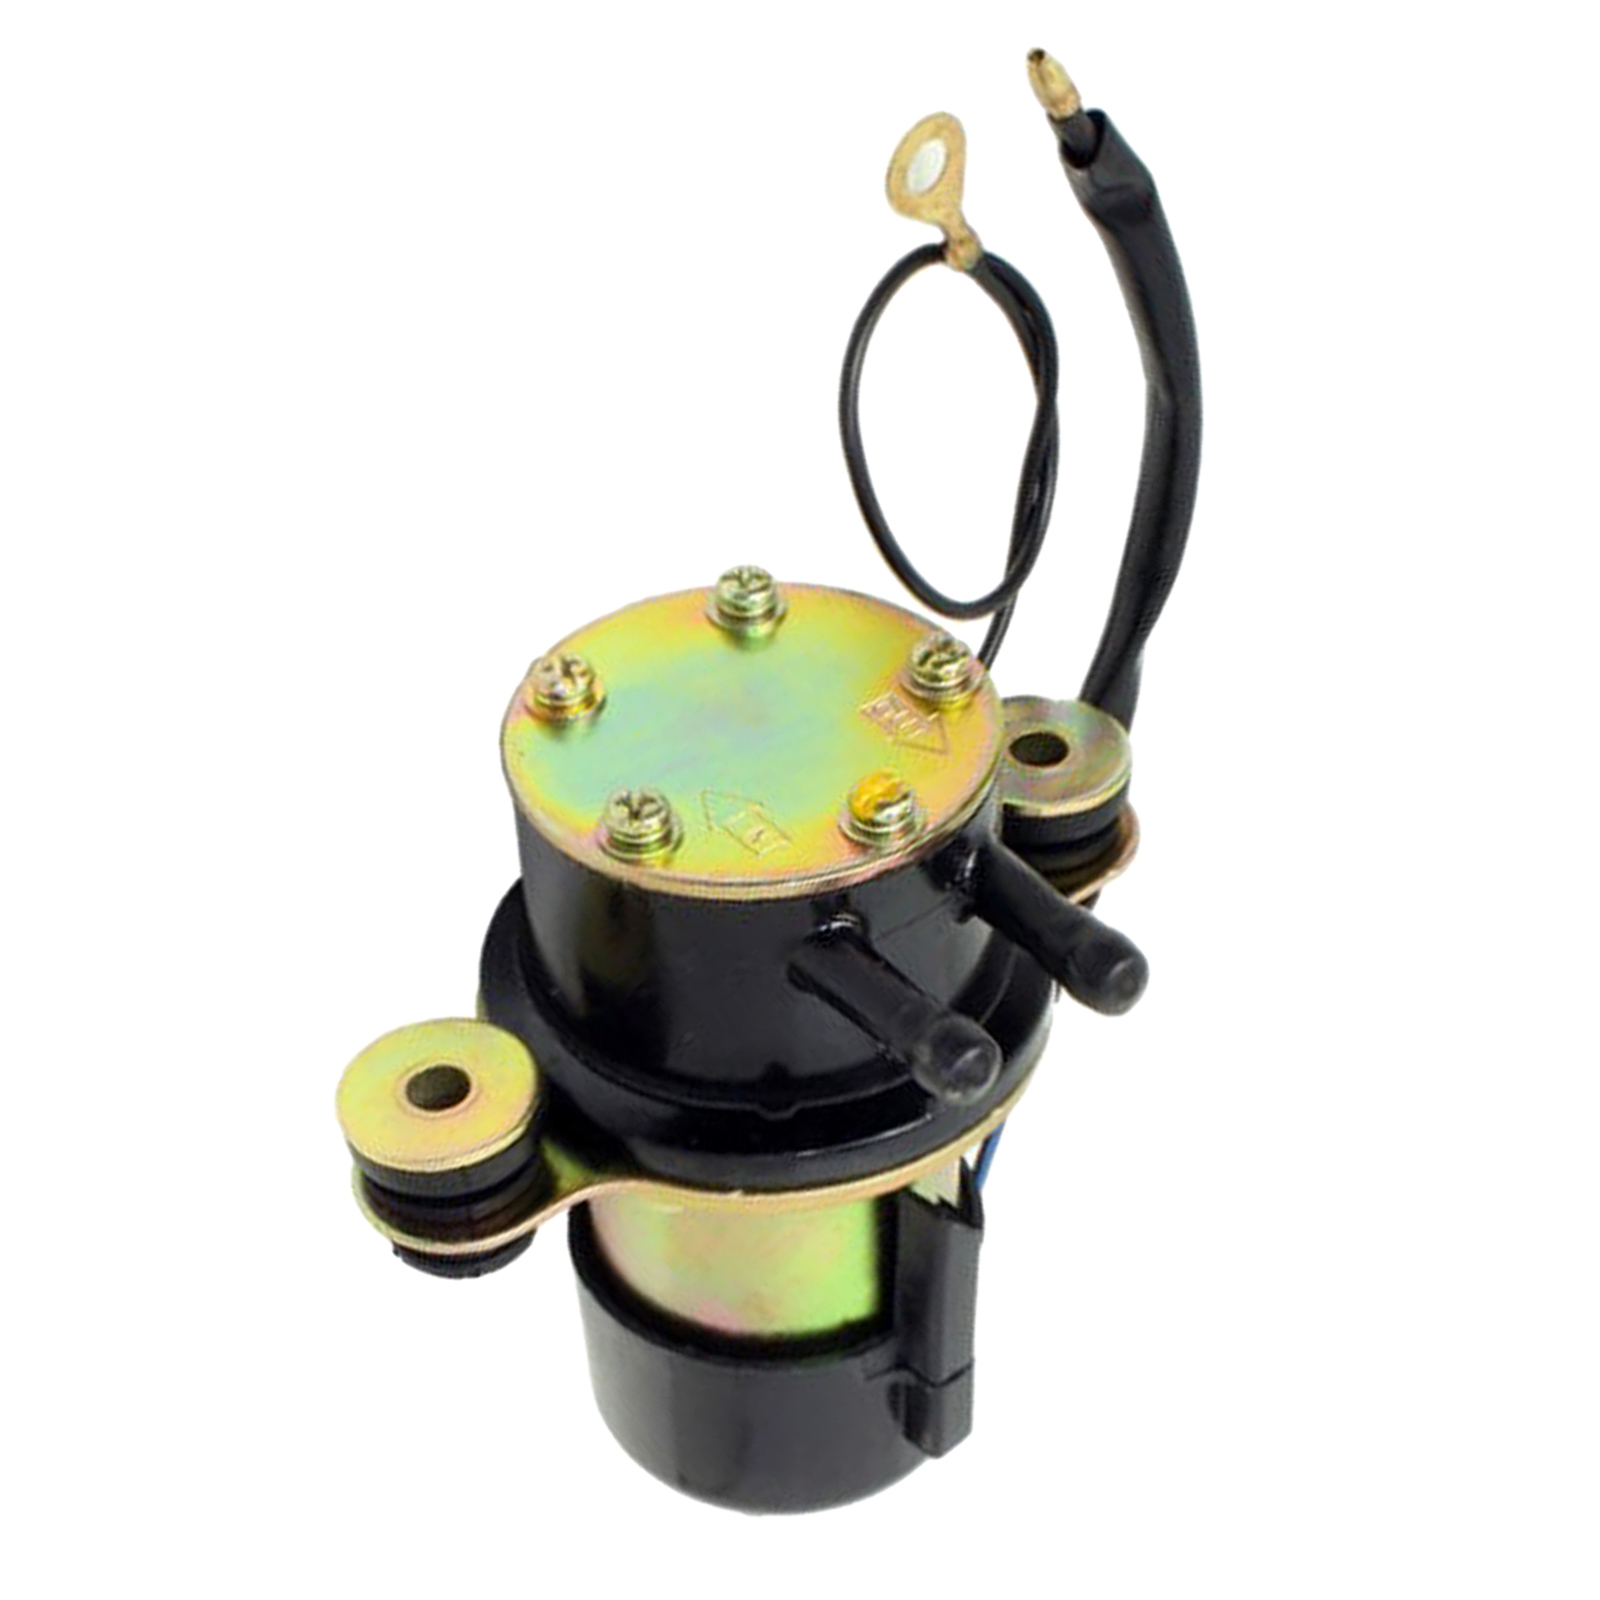 Fuel Pump Fit for Kawasaki 185 86-88 49040-1053 Replace Parts Accessories